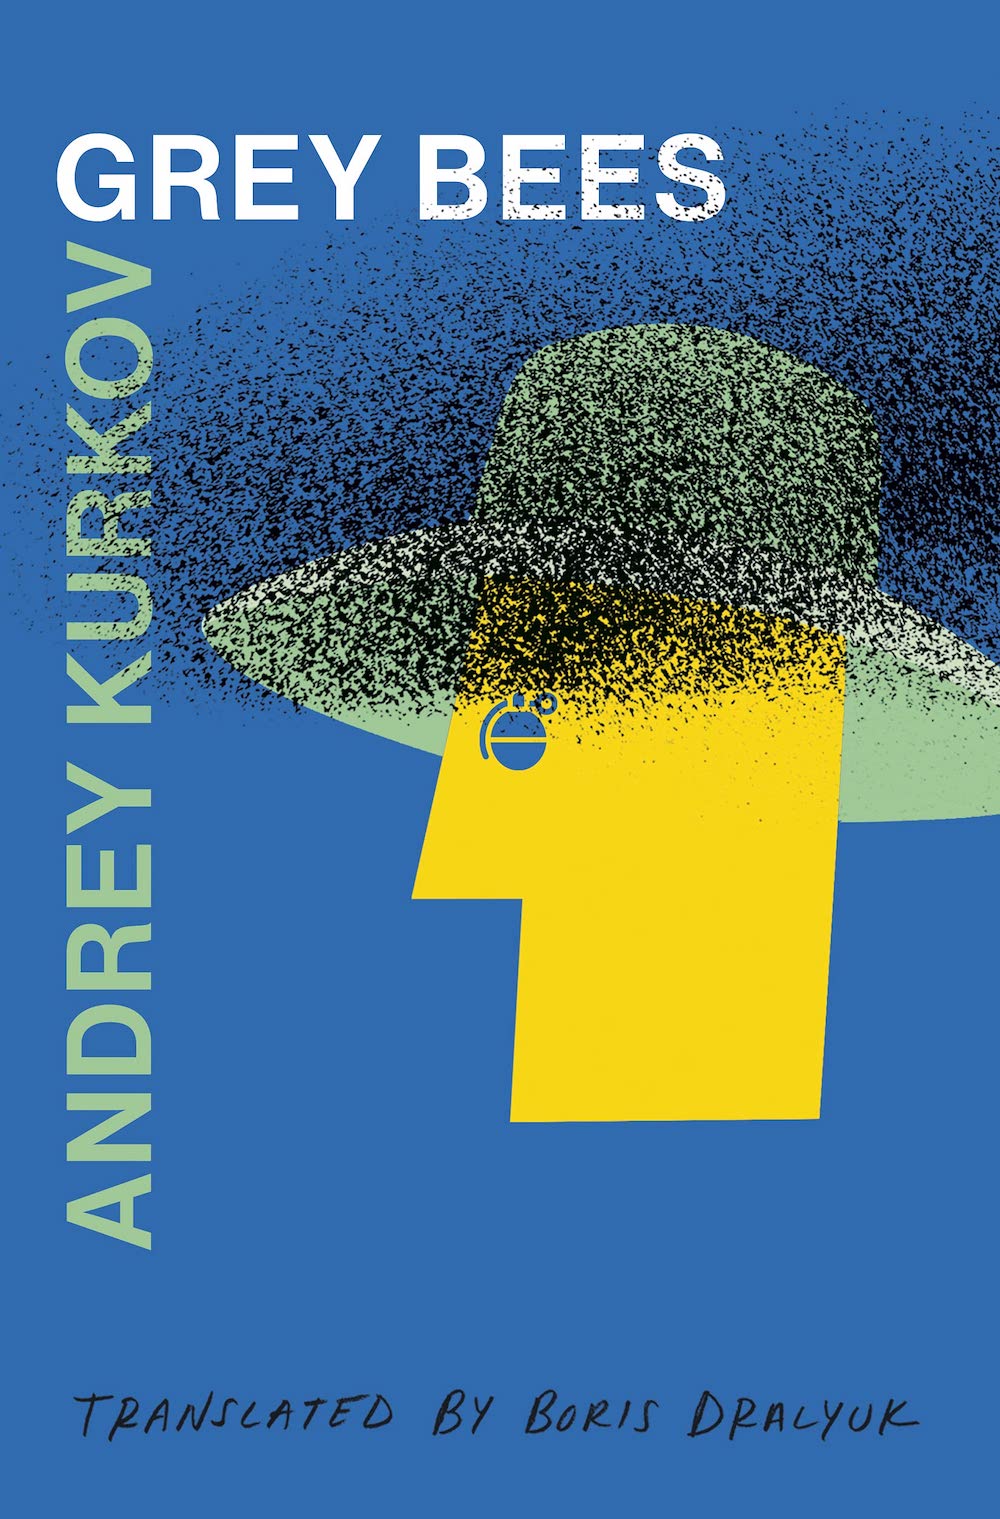 book cover illustratoin of yellow face with ha hat made of a swarm of bees for andrey kurkov's grey bees translated by boris dralyuk